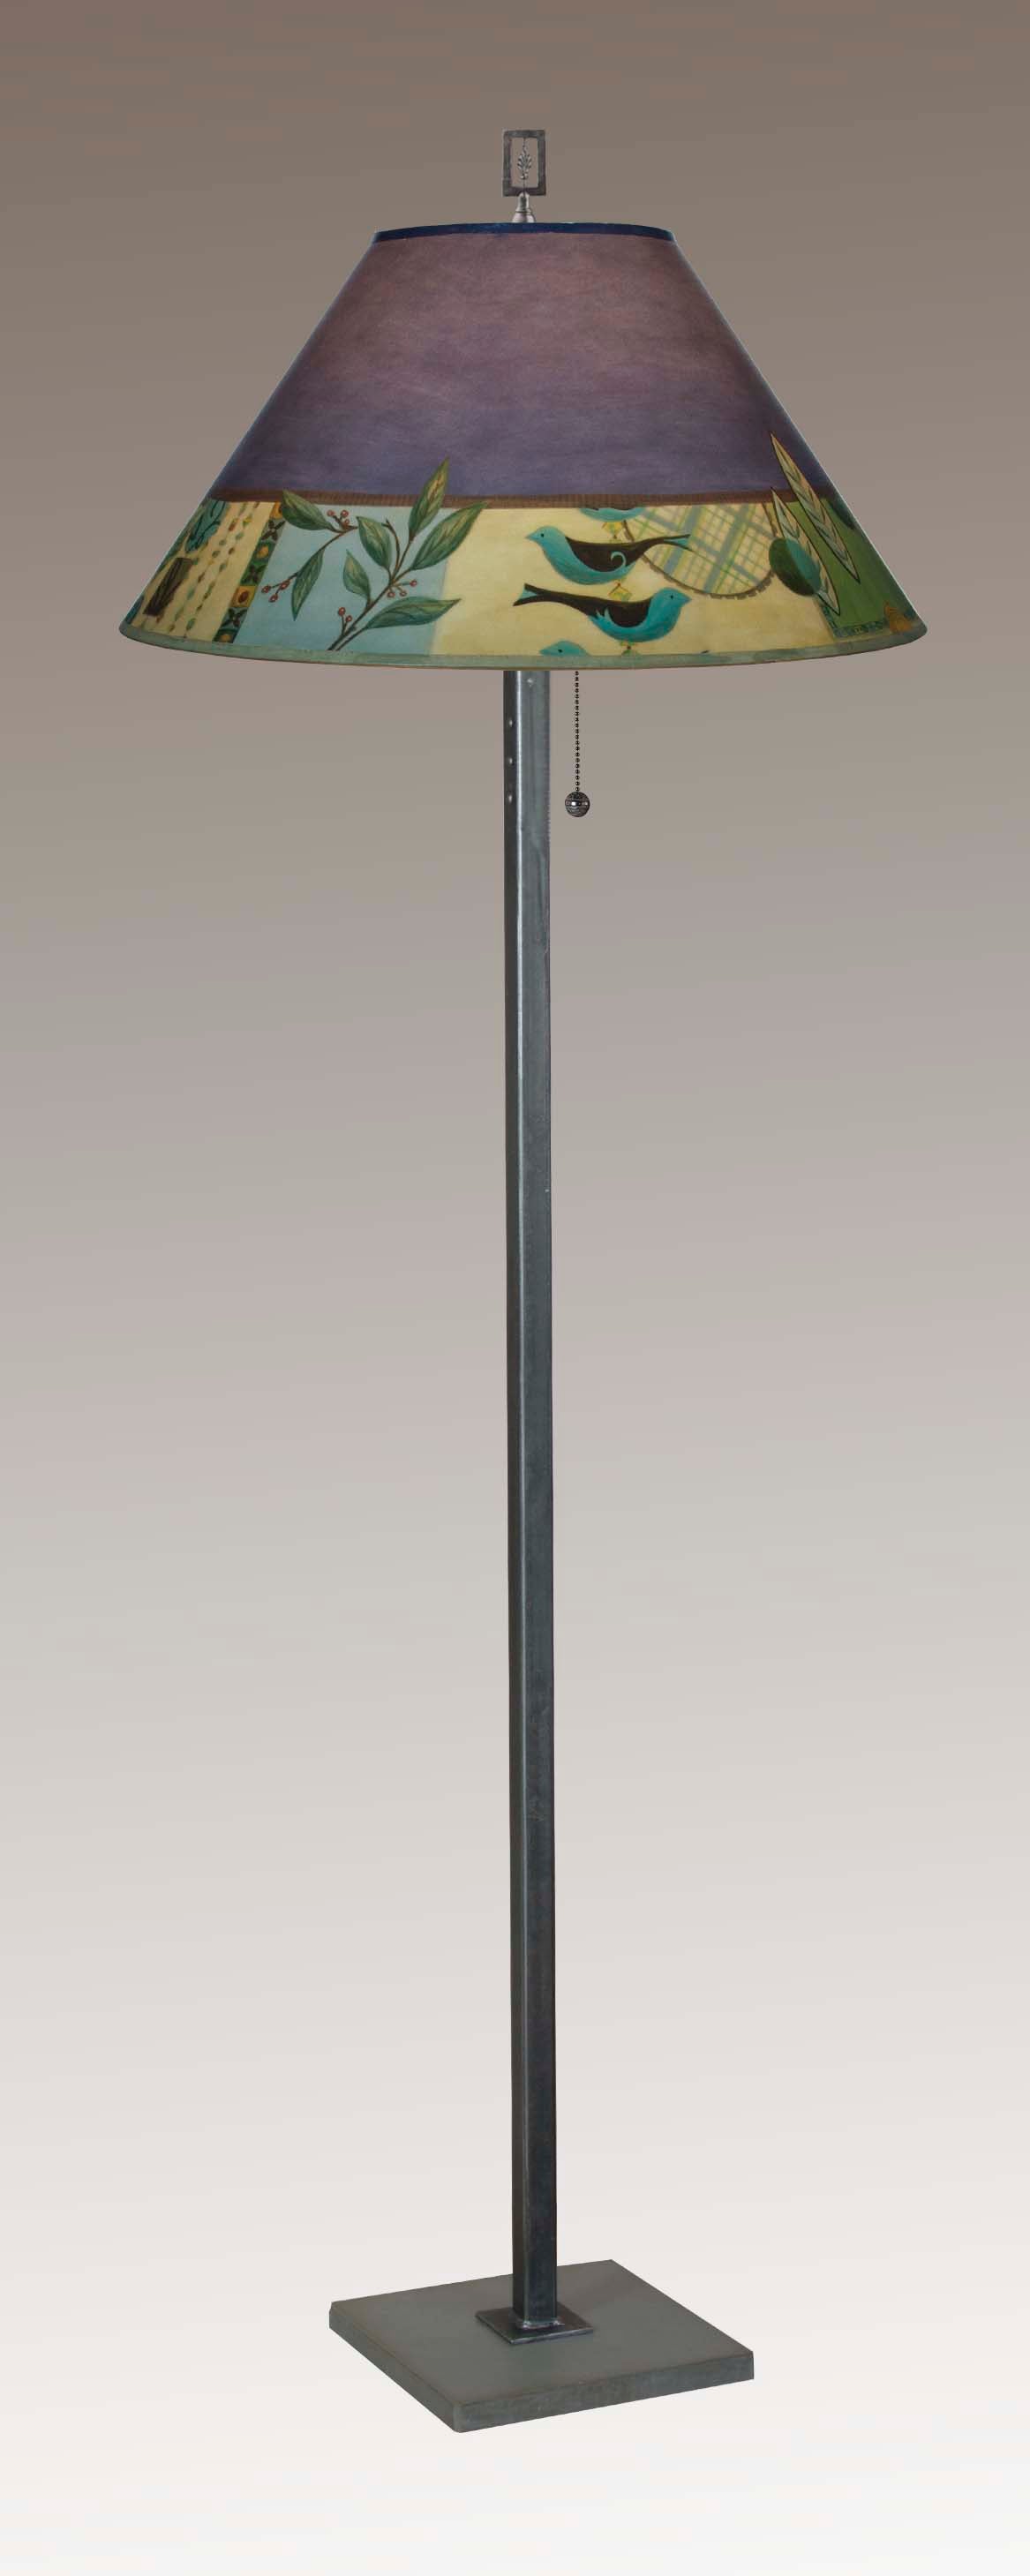 Janna Ugone &amp; Co Floor Lamp Steel Floor Lamp with Large Conical Shade in New Capri Periwinkle